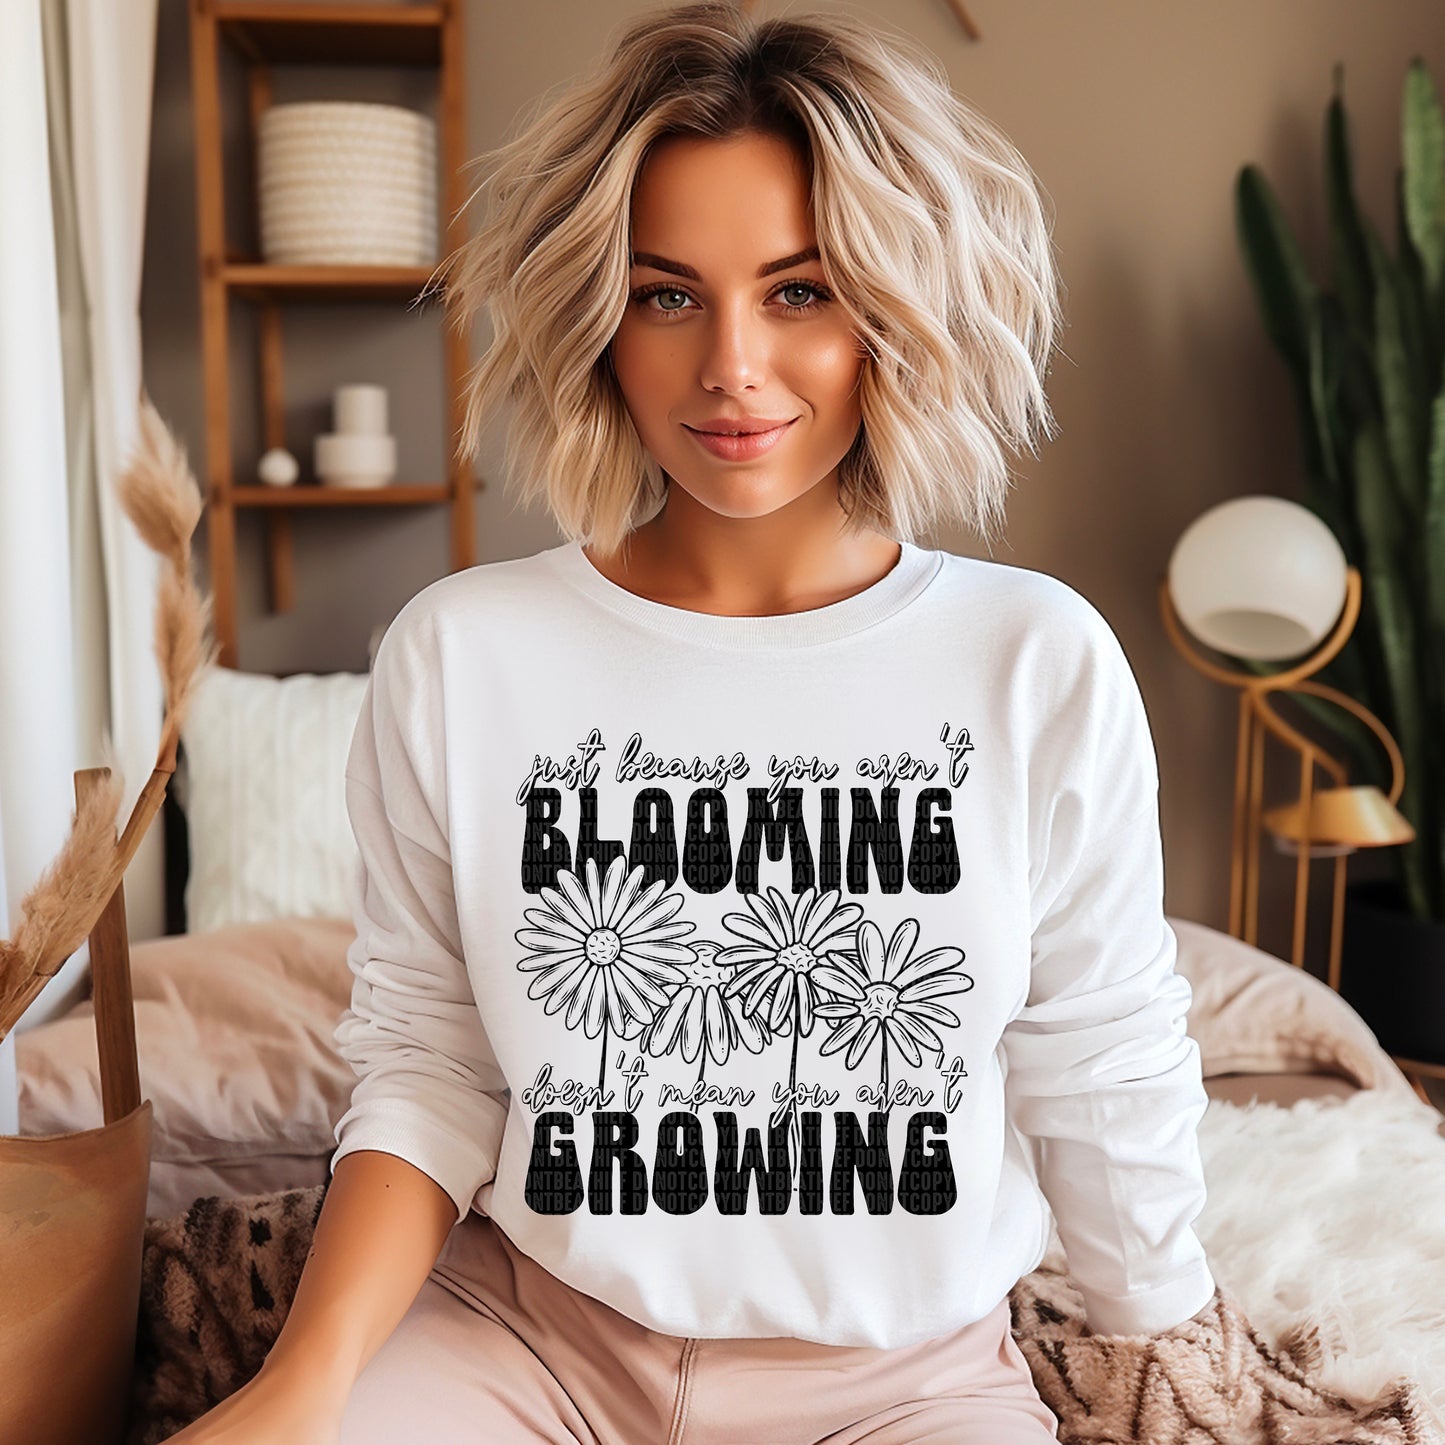 Just because you aren't blooming doesn't mean you aren't growing